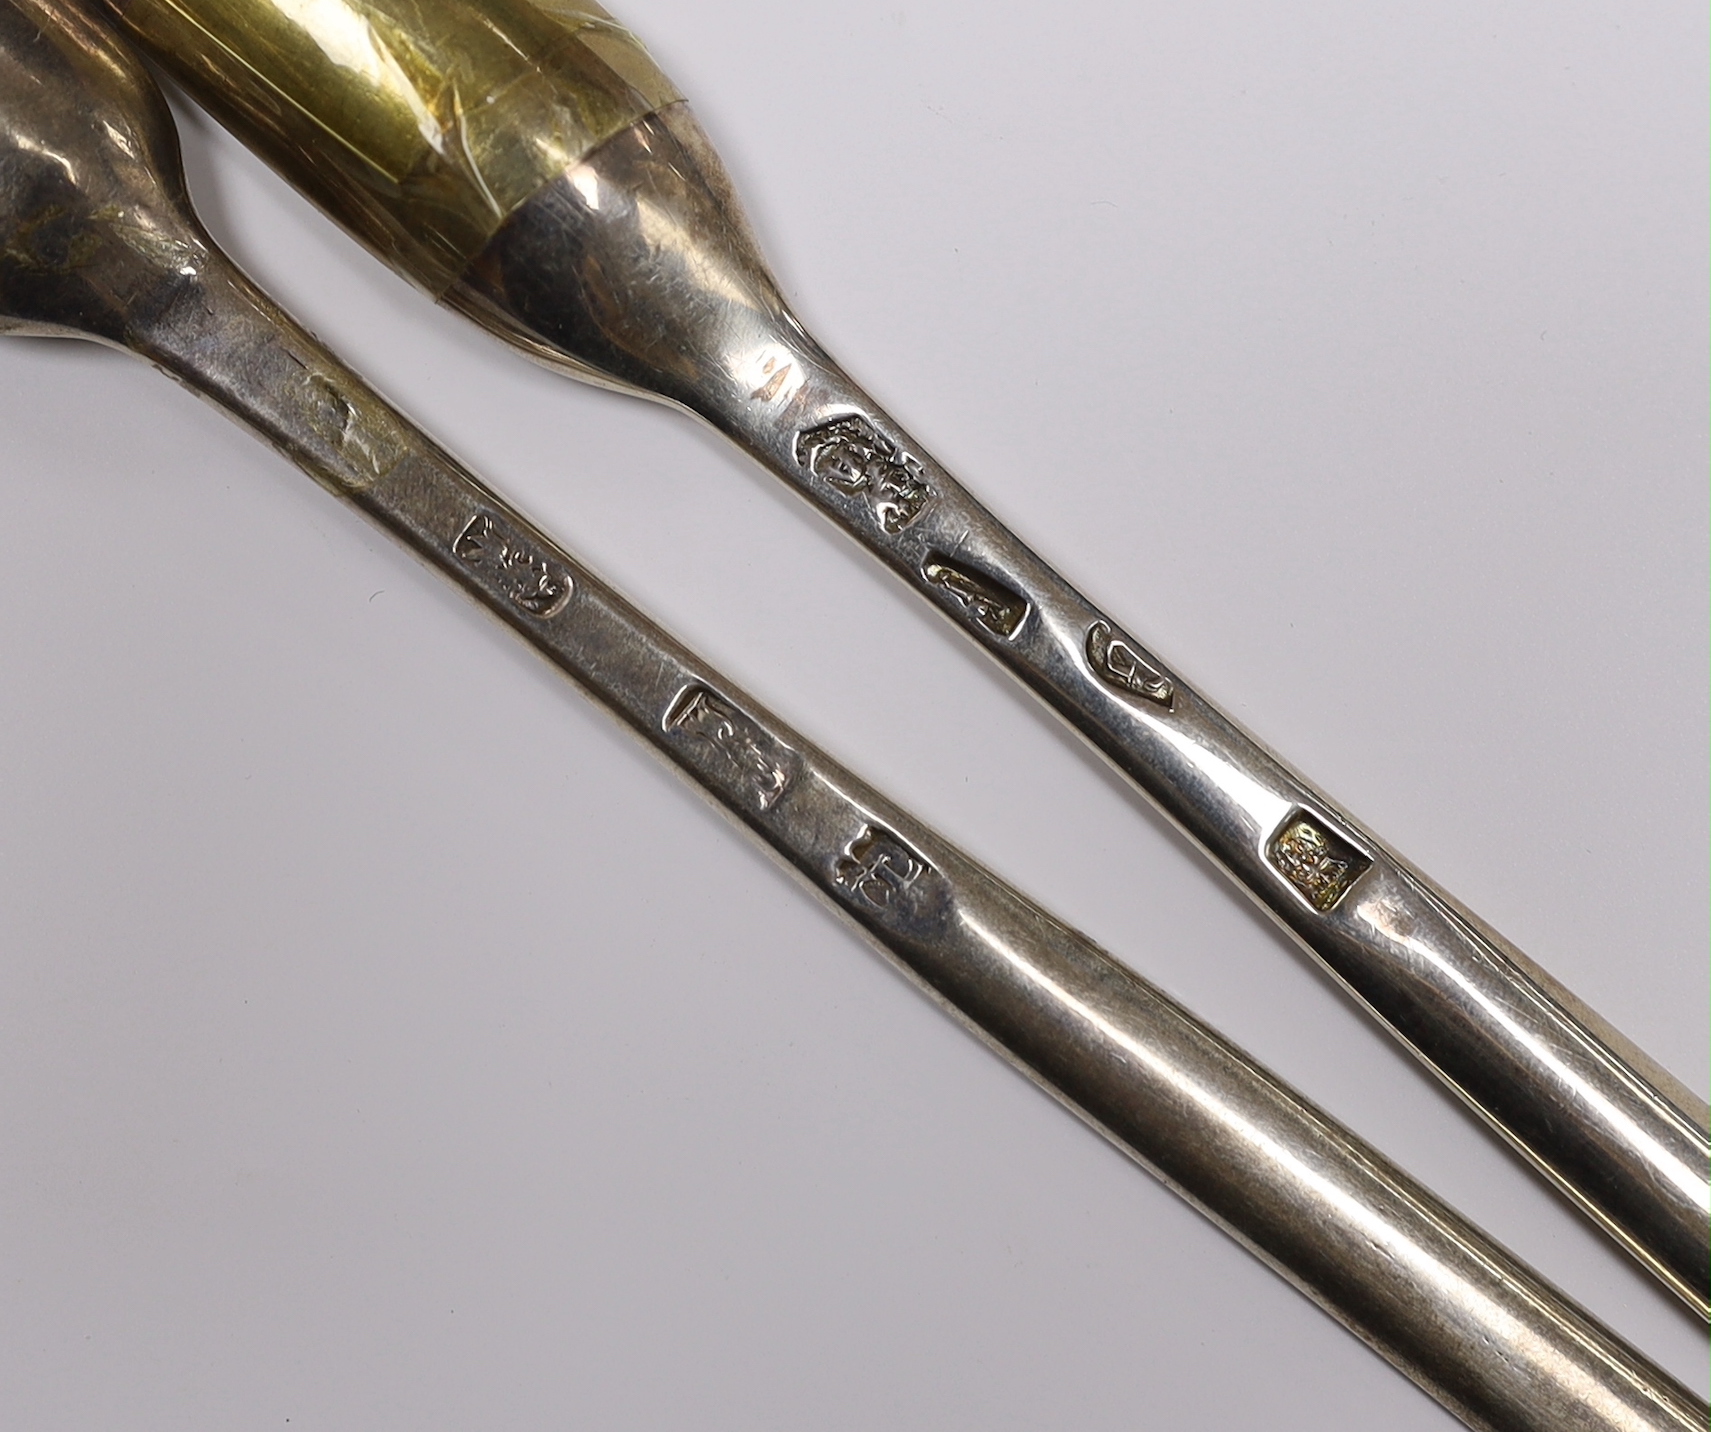 Two early 18th century silver marrow scoops, Henry Clarke I, London, circa 1720 and Andrew Archer, London, 1722, both approx. 21cm, 94 grams.